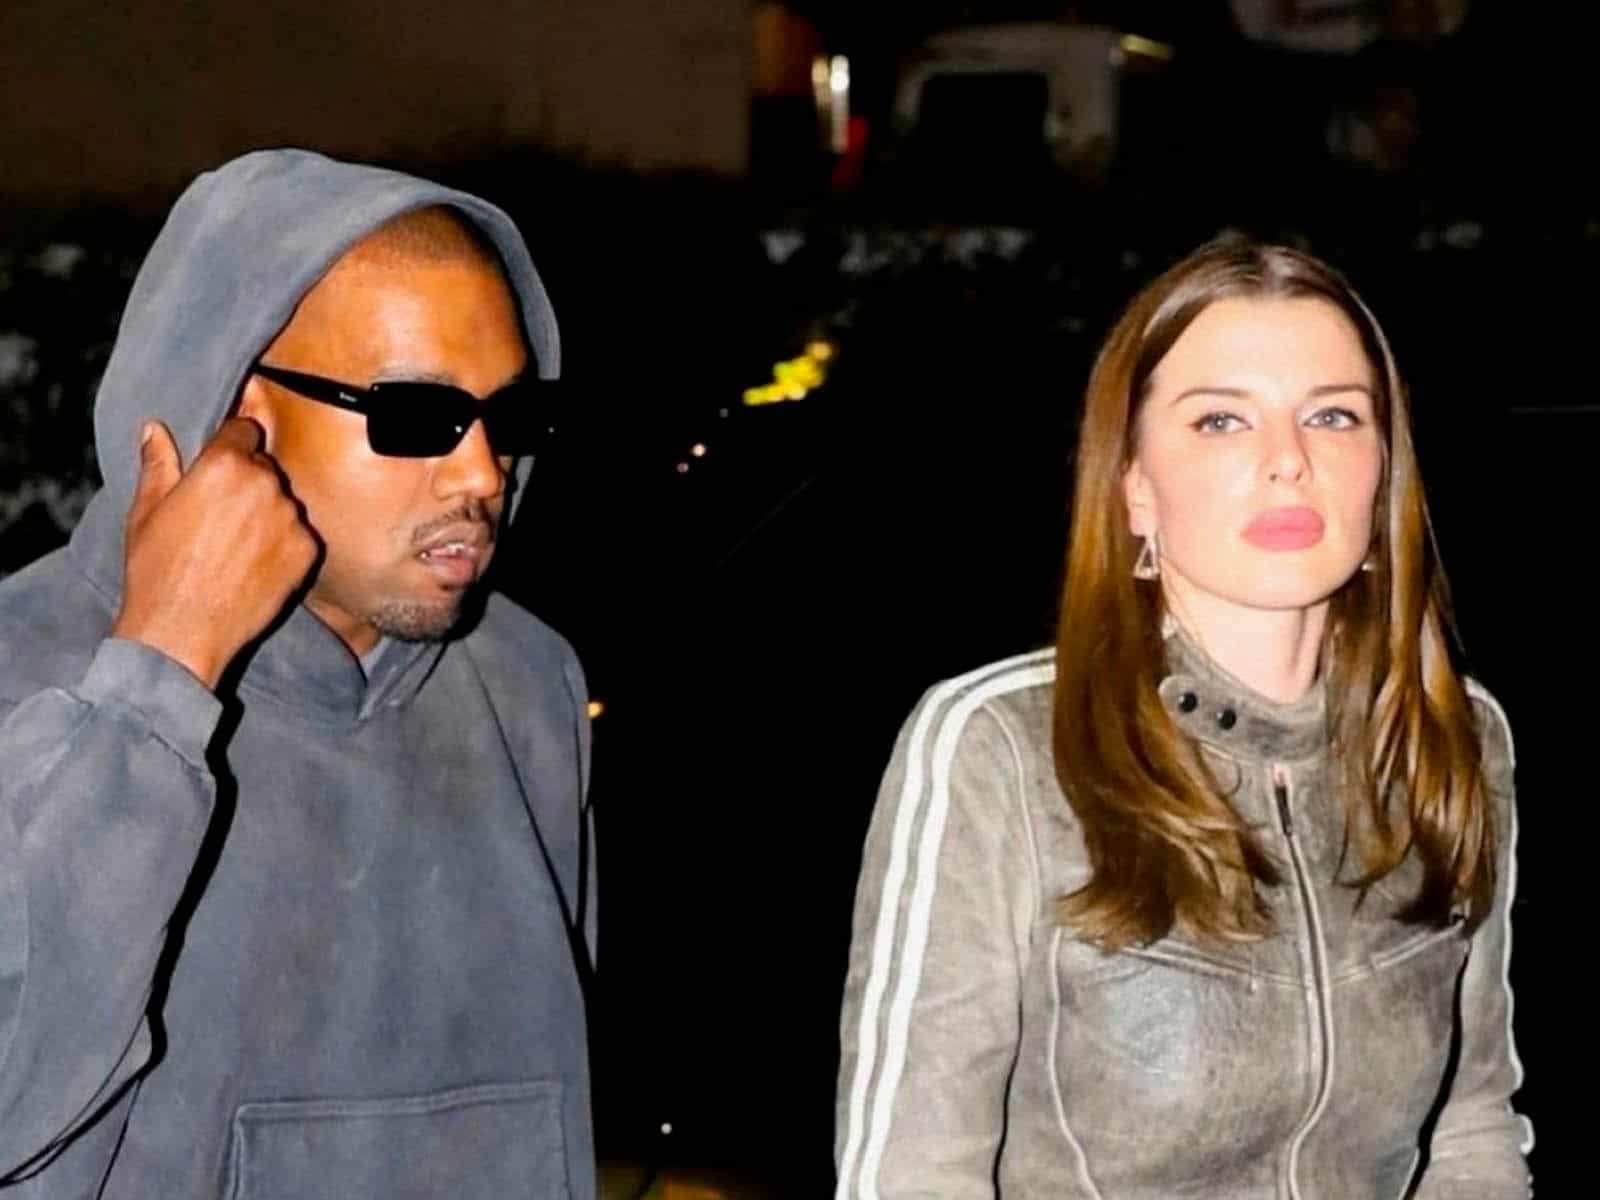 Julia Fox confirms break-up with Kanye West